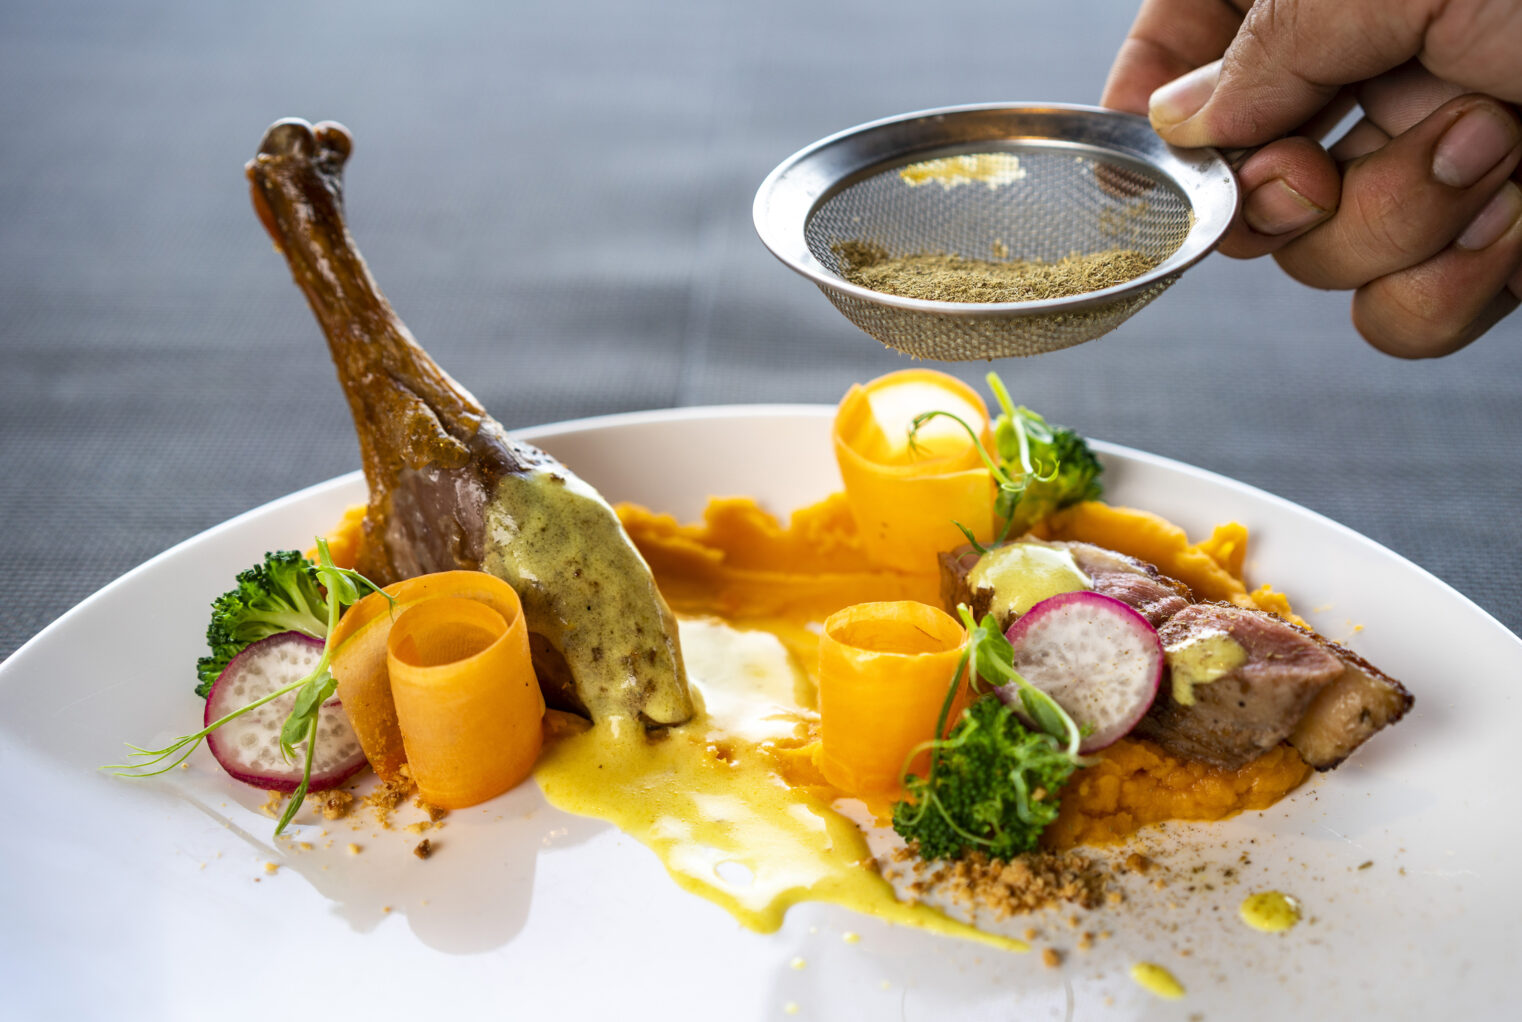 A duck leg on a plate with carrots and a person sprinkling herbs on the dish